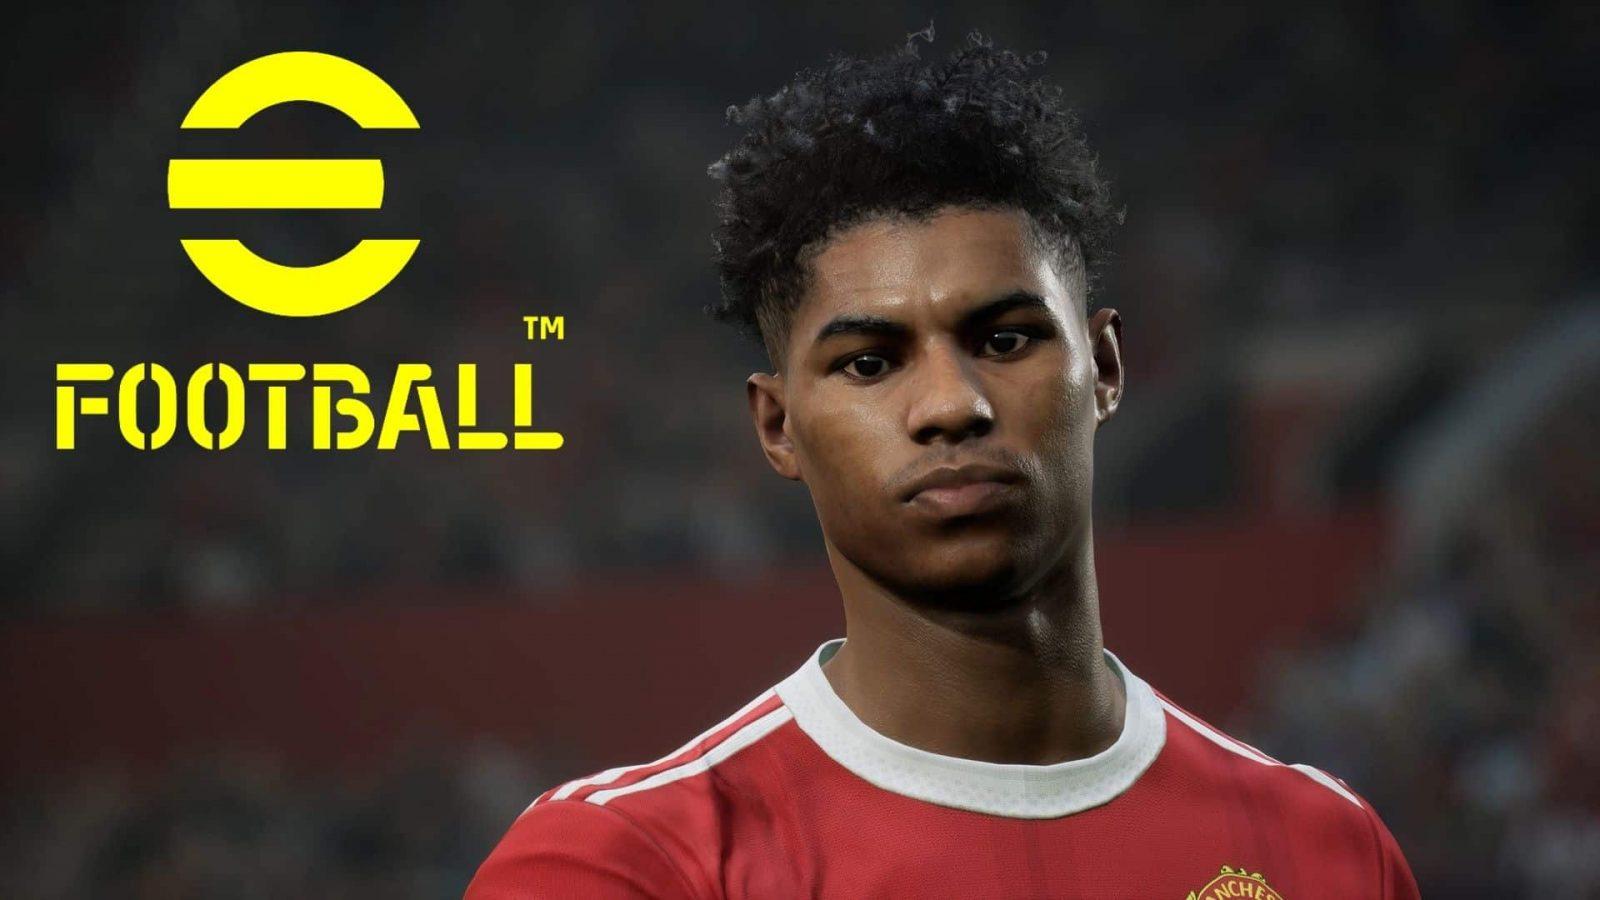 How to play with any team in eFootball PES 2022